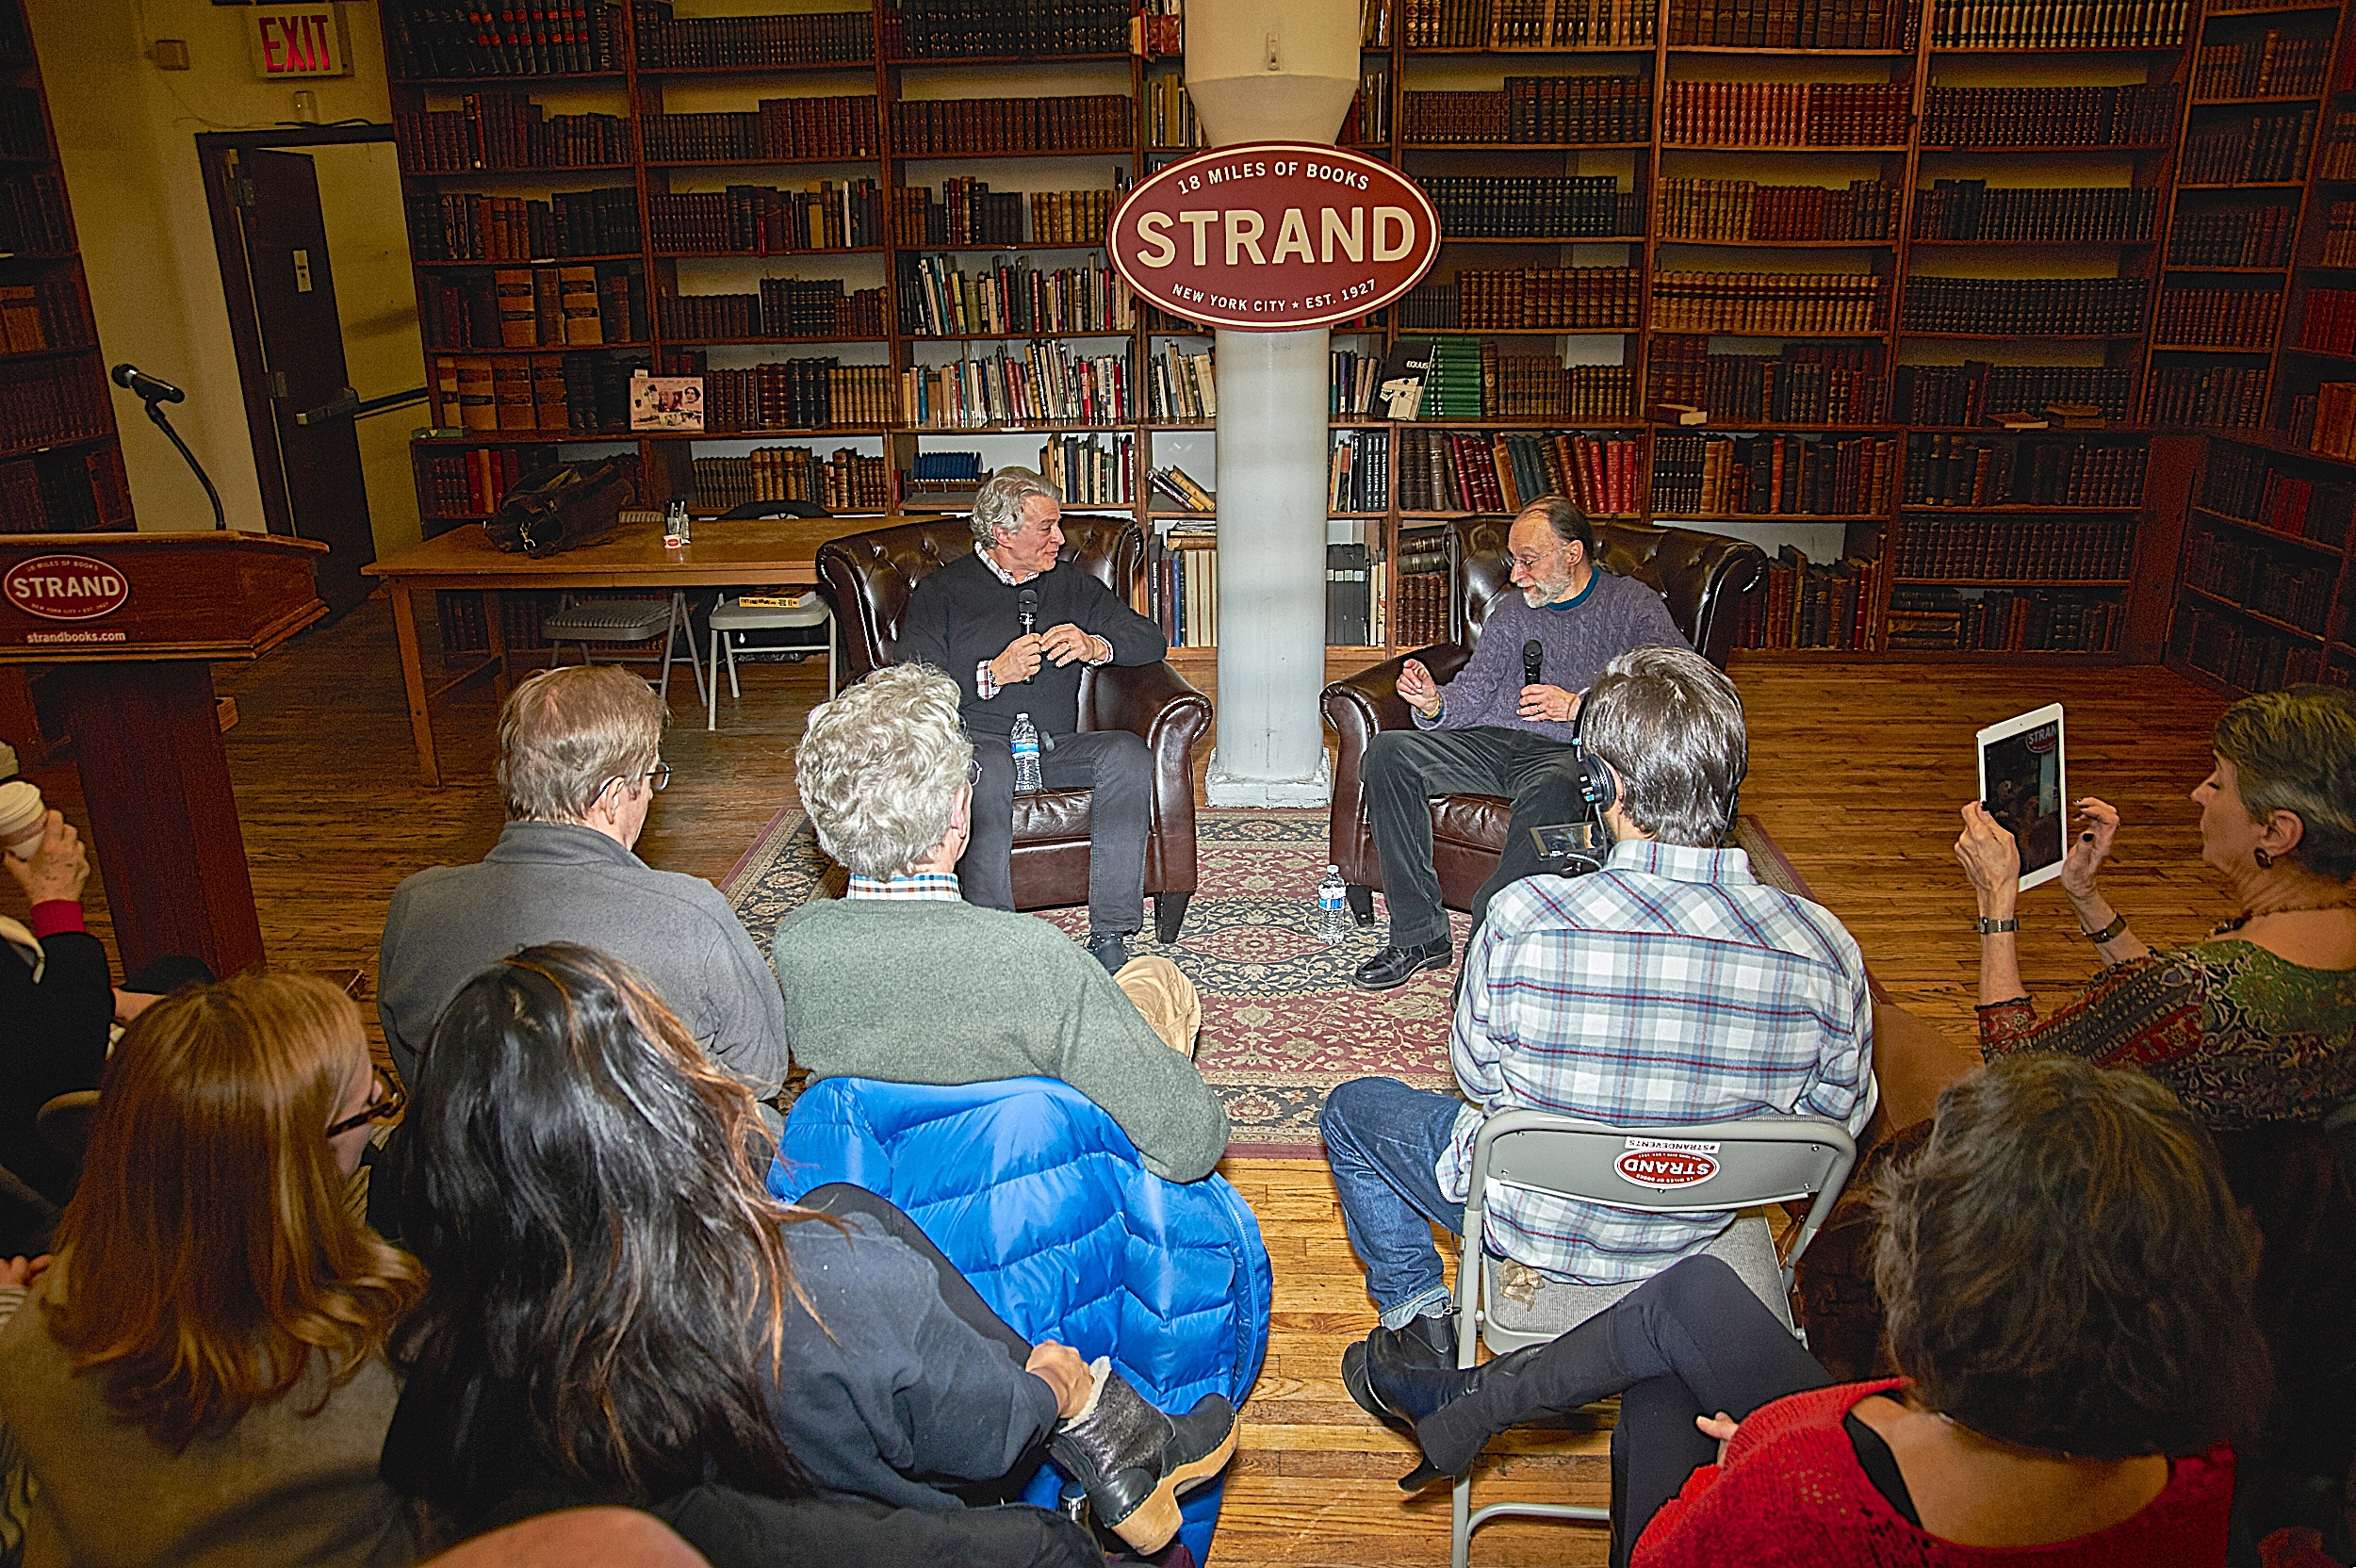 Discussing Bop Apocalypse with John Tytell at the Strand, January of 2017